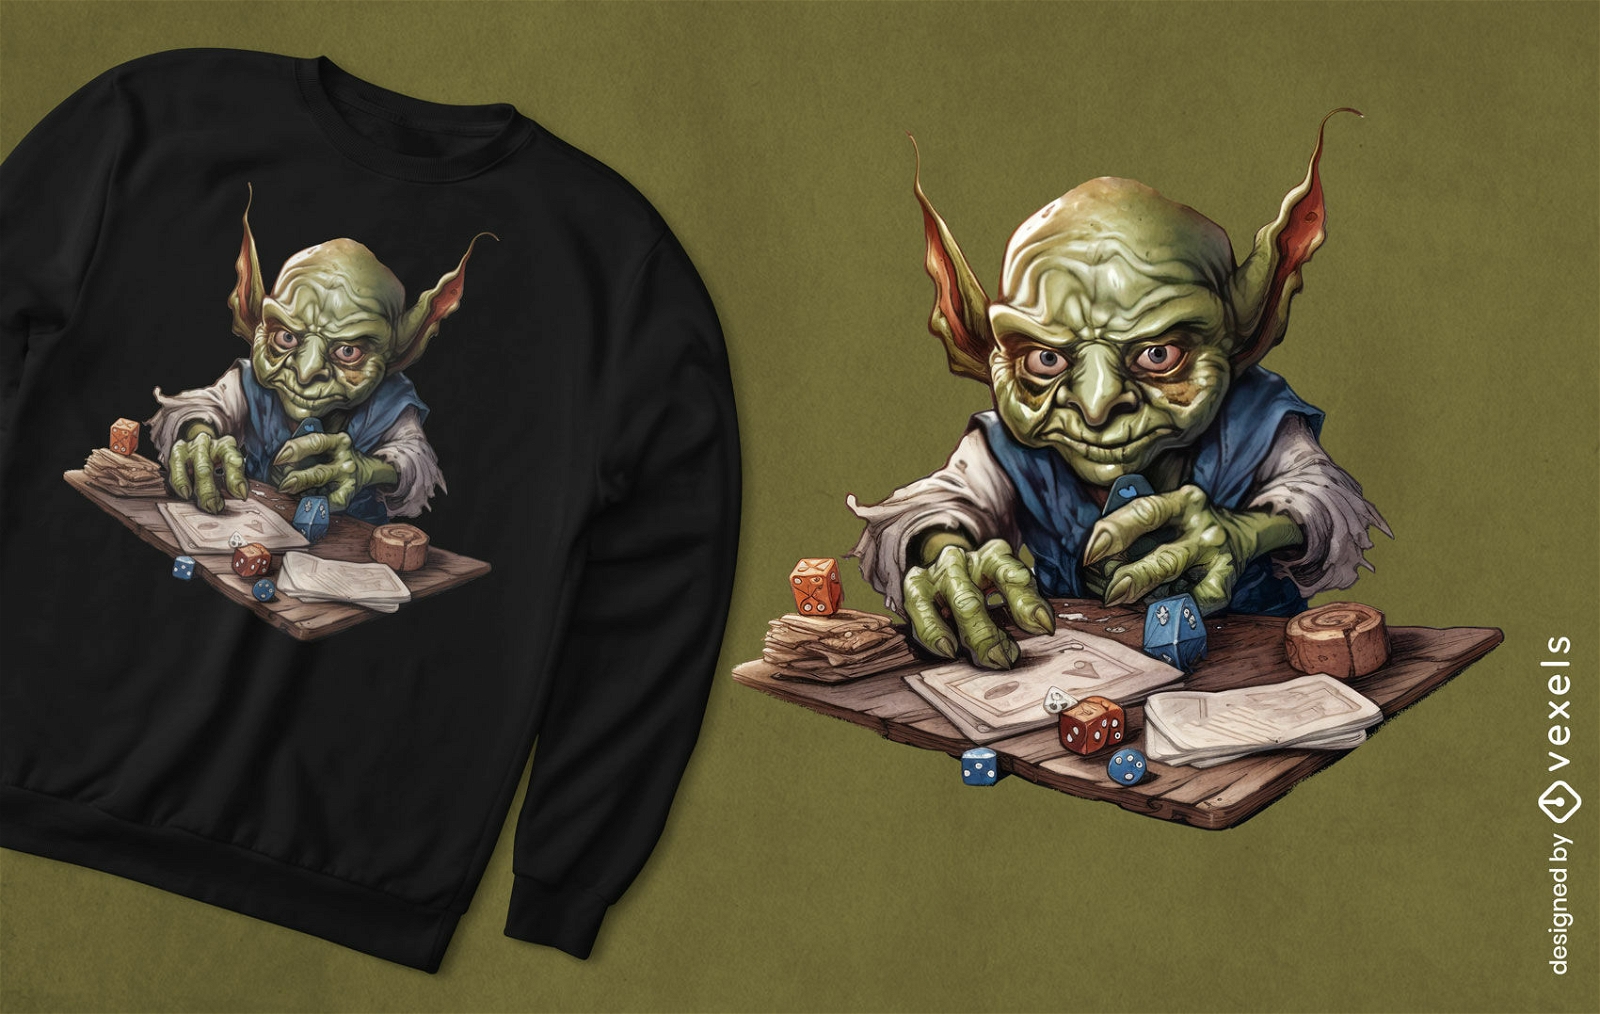 Goblin role-playing t-shirt design